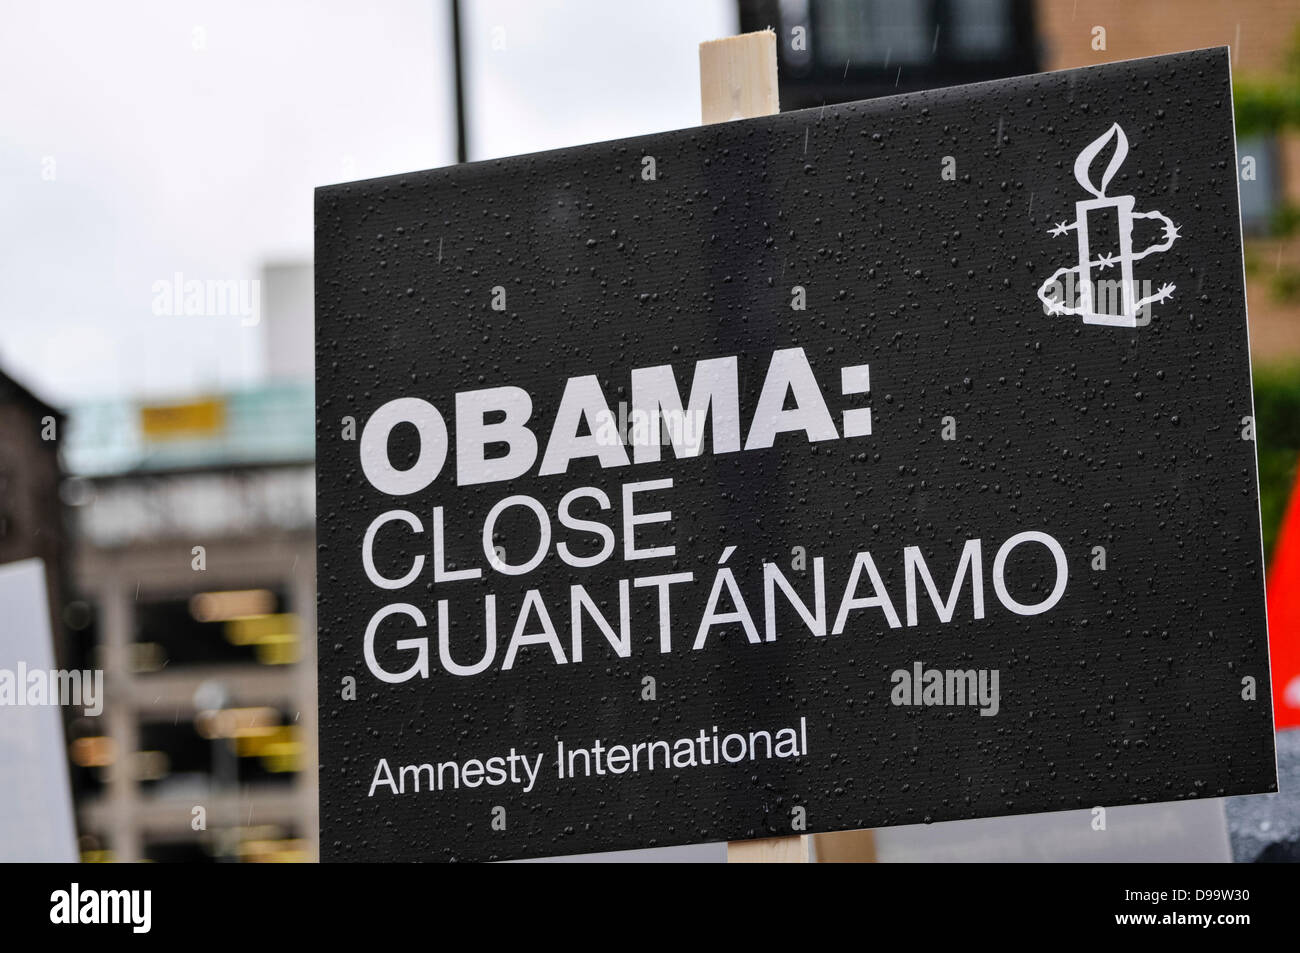 Belfast, Northern Ireland. 15th June 2013. Amnesty International banner calling for President Obama to close Guantanamo bay prison and rendition/detention centre Credit:  Stephen Barnes/Alamy Live News Stock Photo